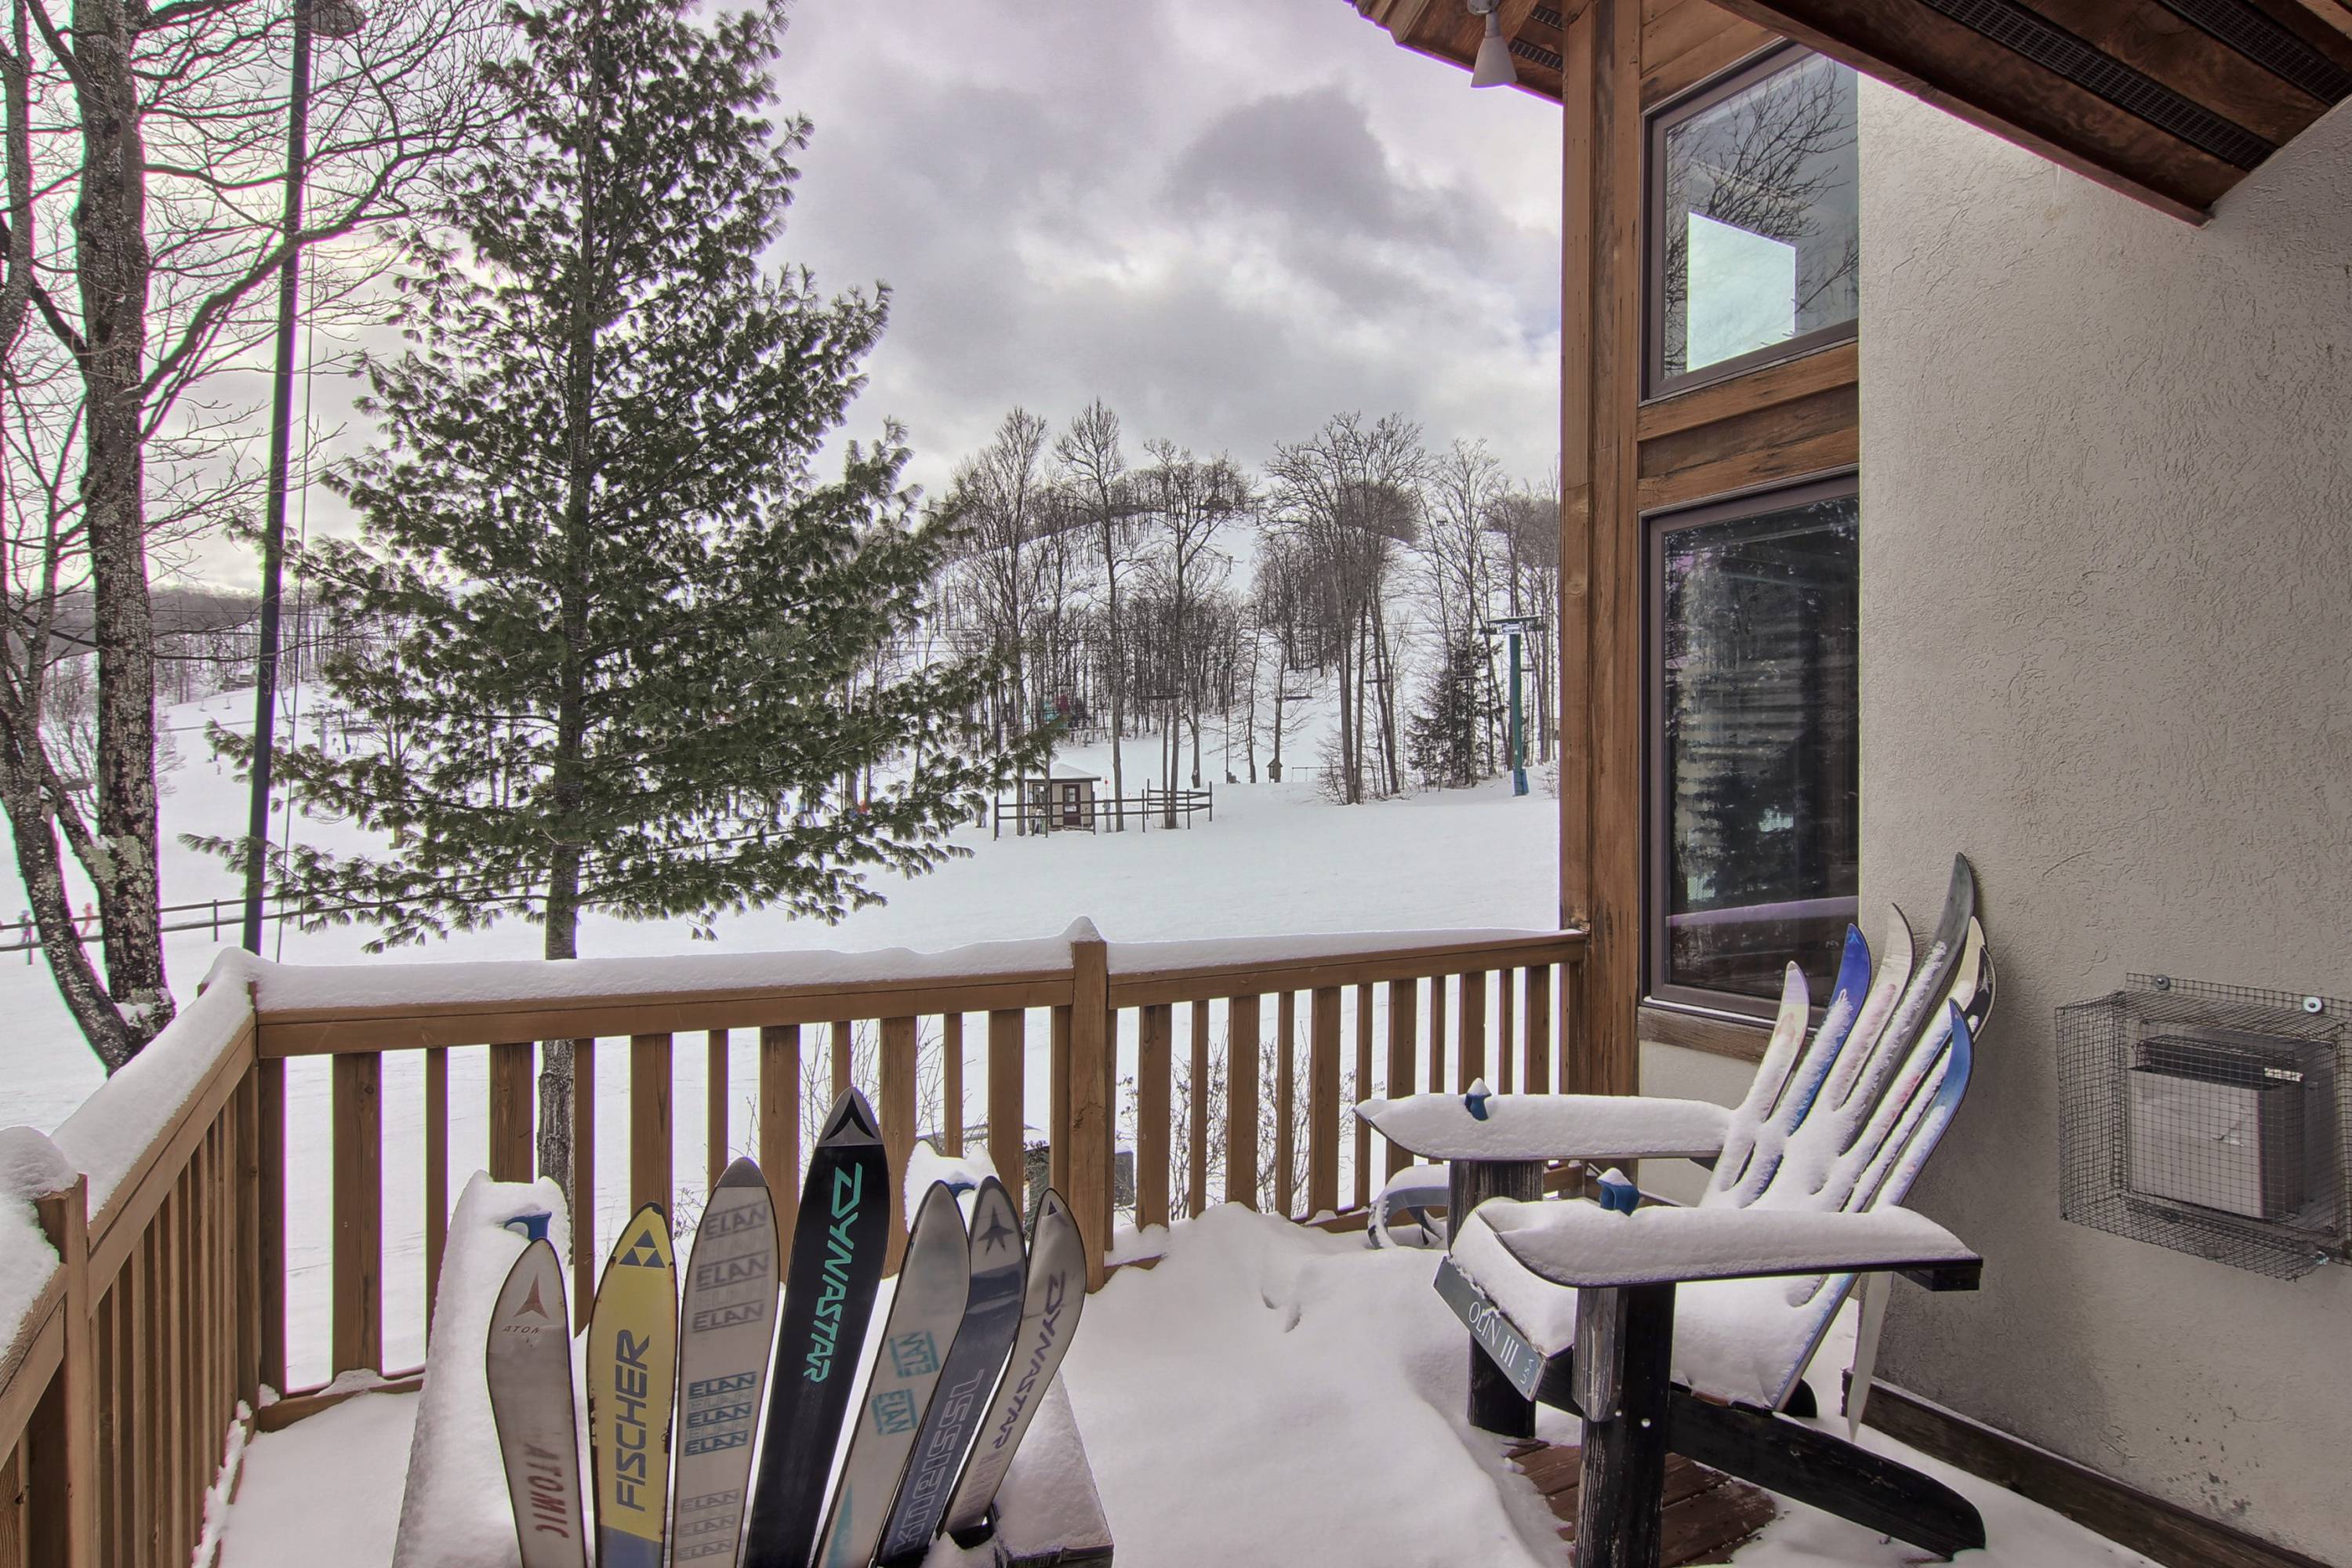 Luxury dual condos at Boyne Mountain Resort offering ski-in/ski-out experience and stunning views